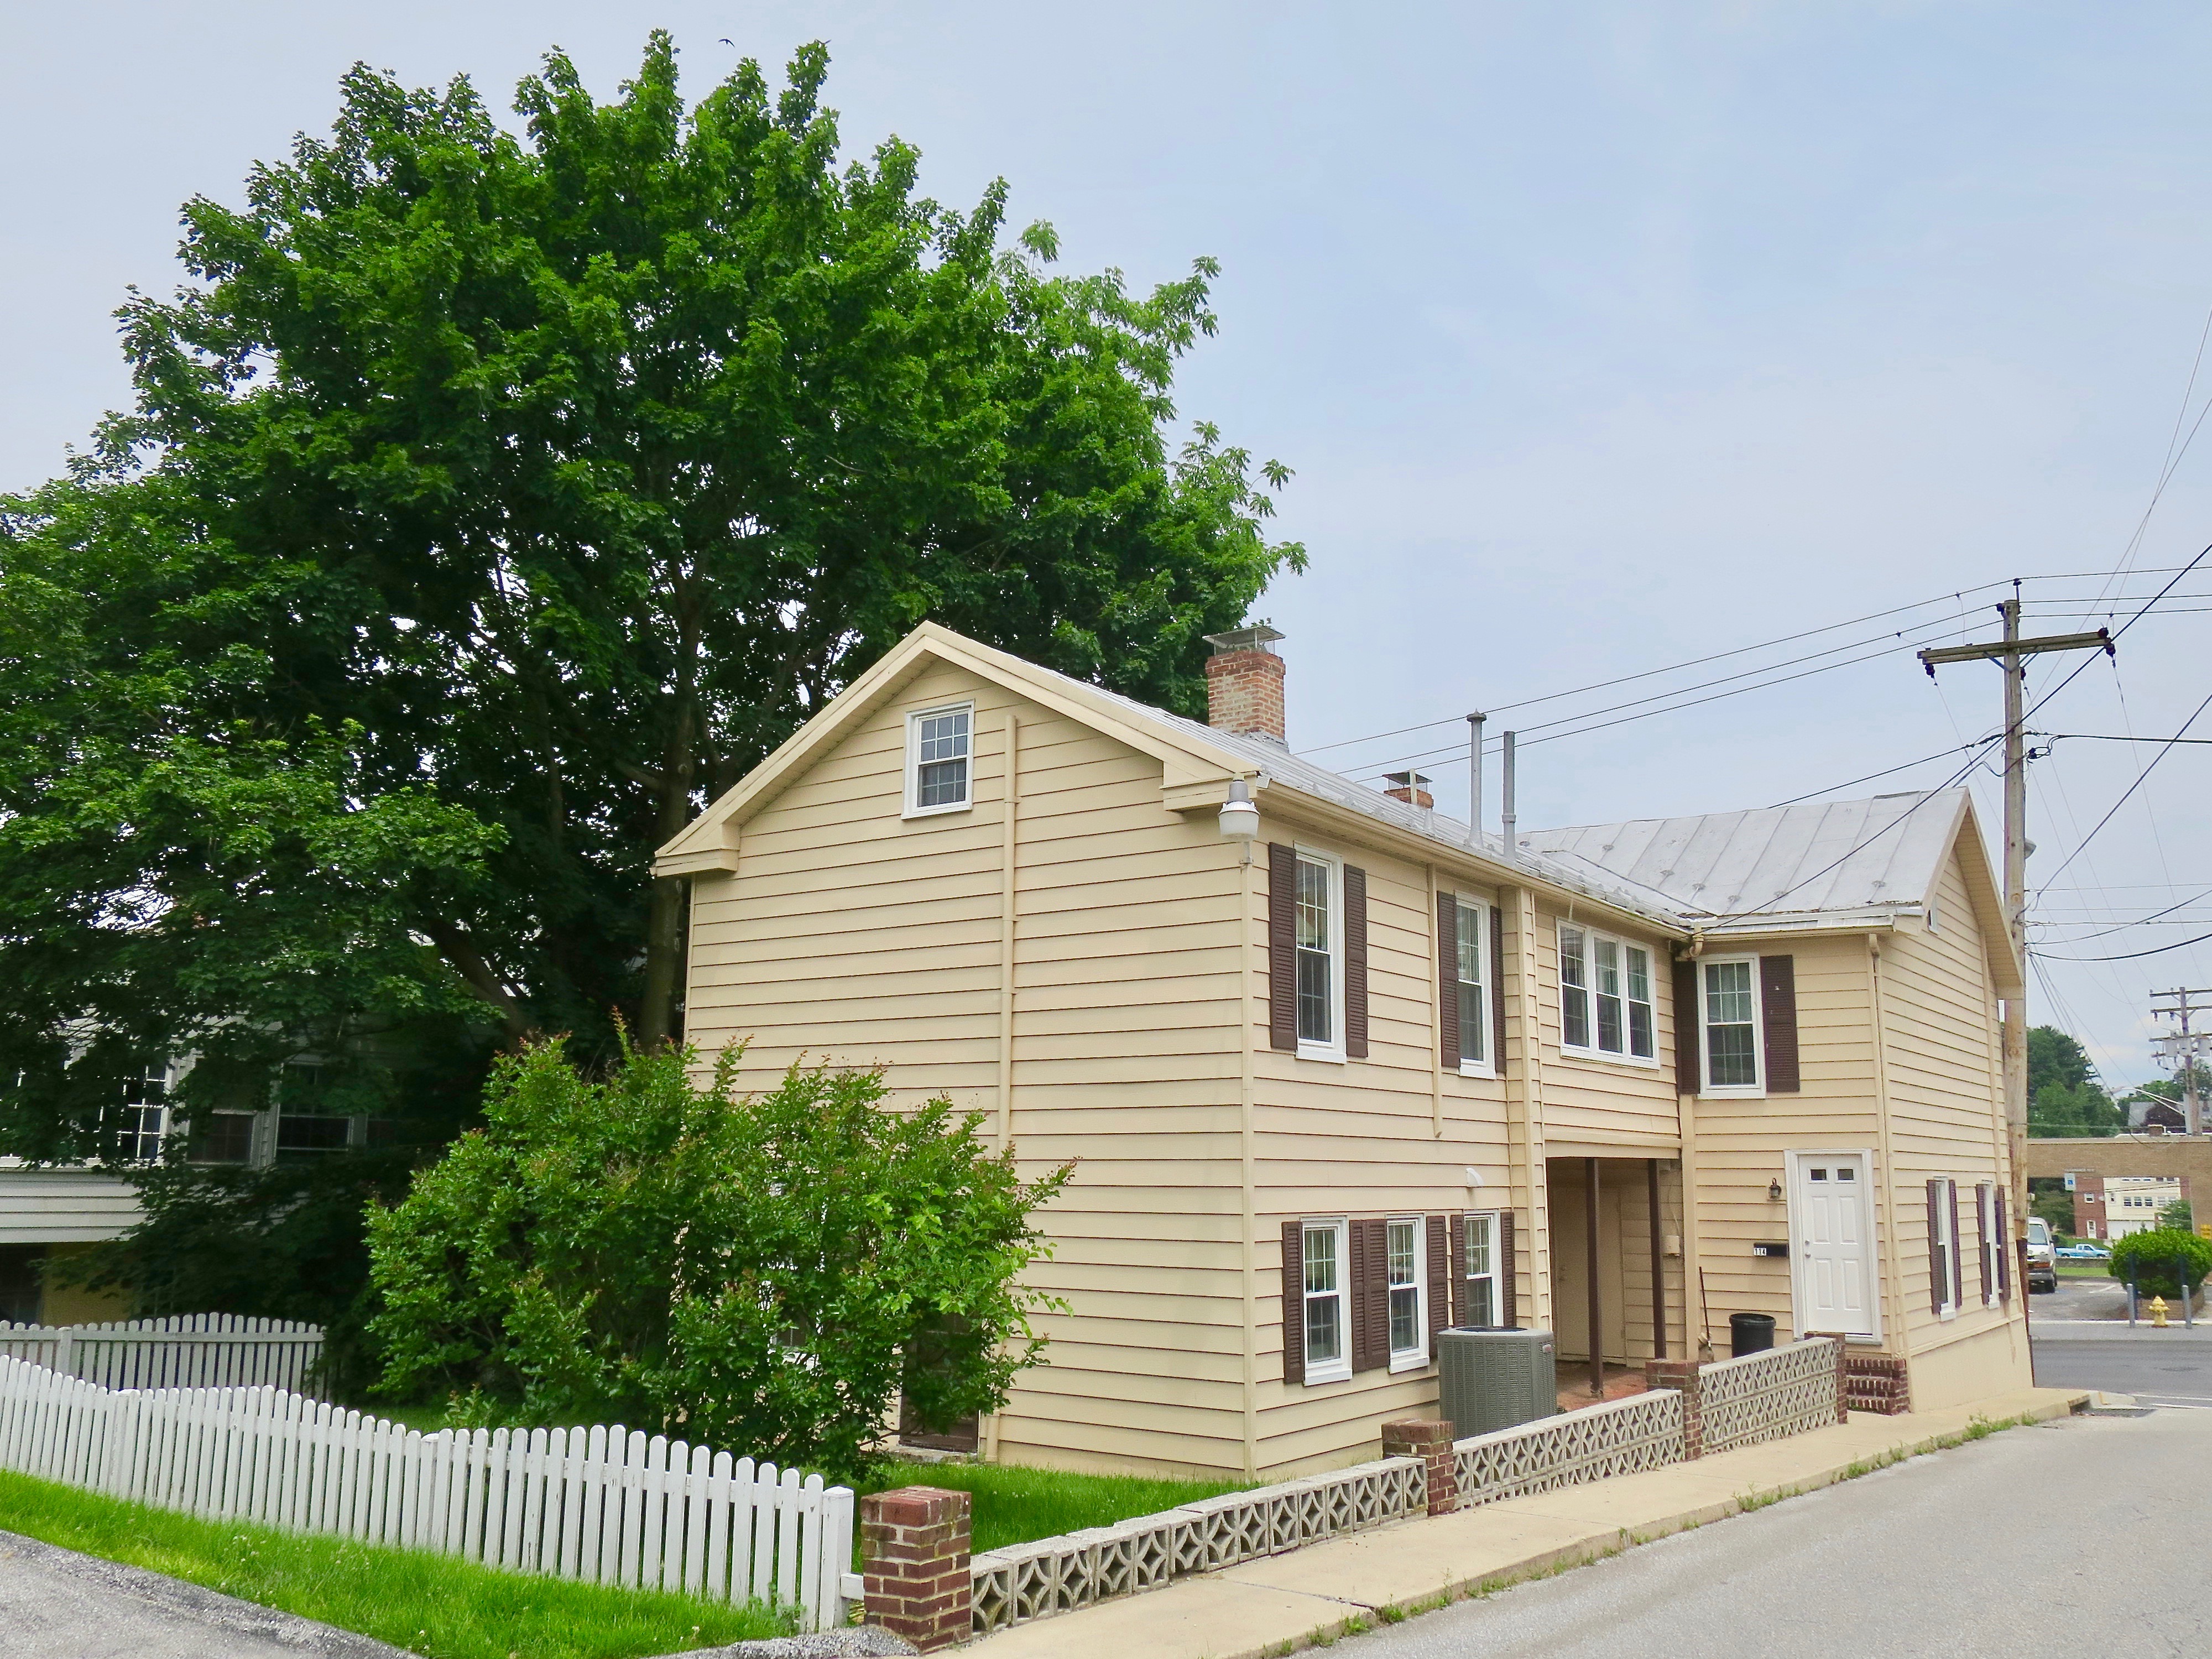 114 Main,Westminster,Maryland 21157,Office,Main,1103